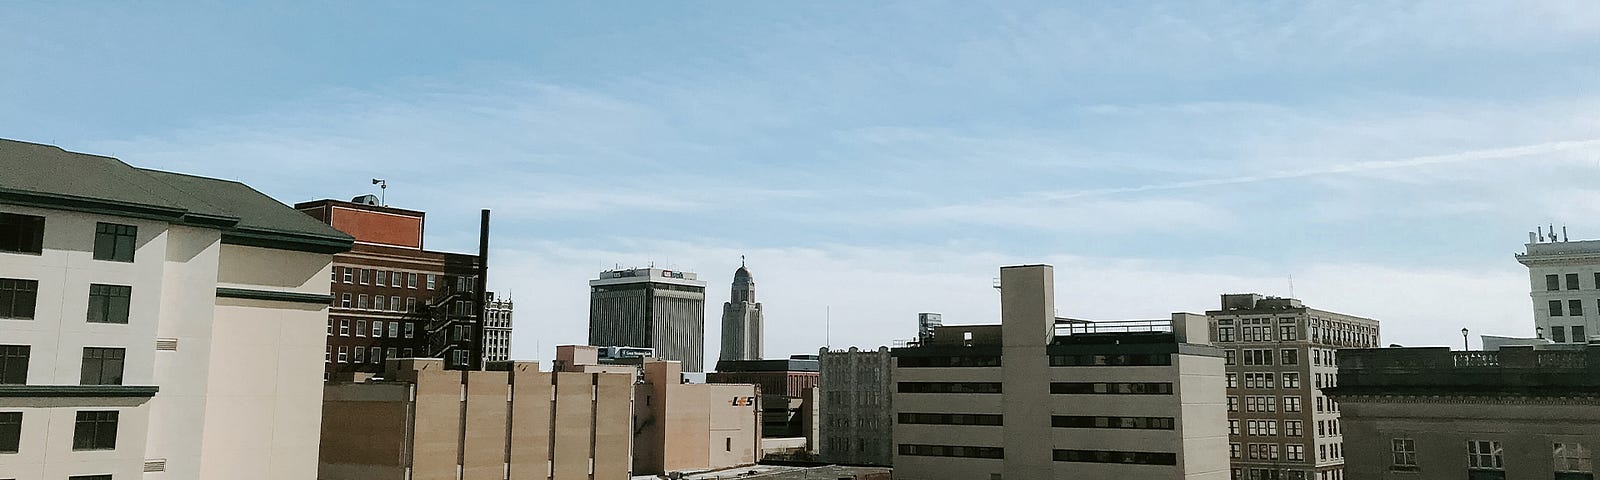 The Lincoln skyline with the state capitol in the distance on a sunny day